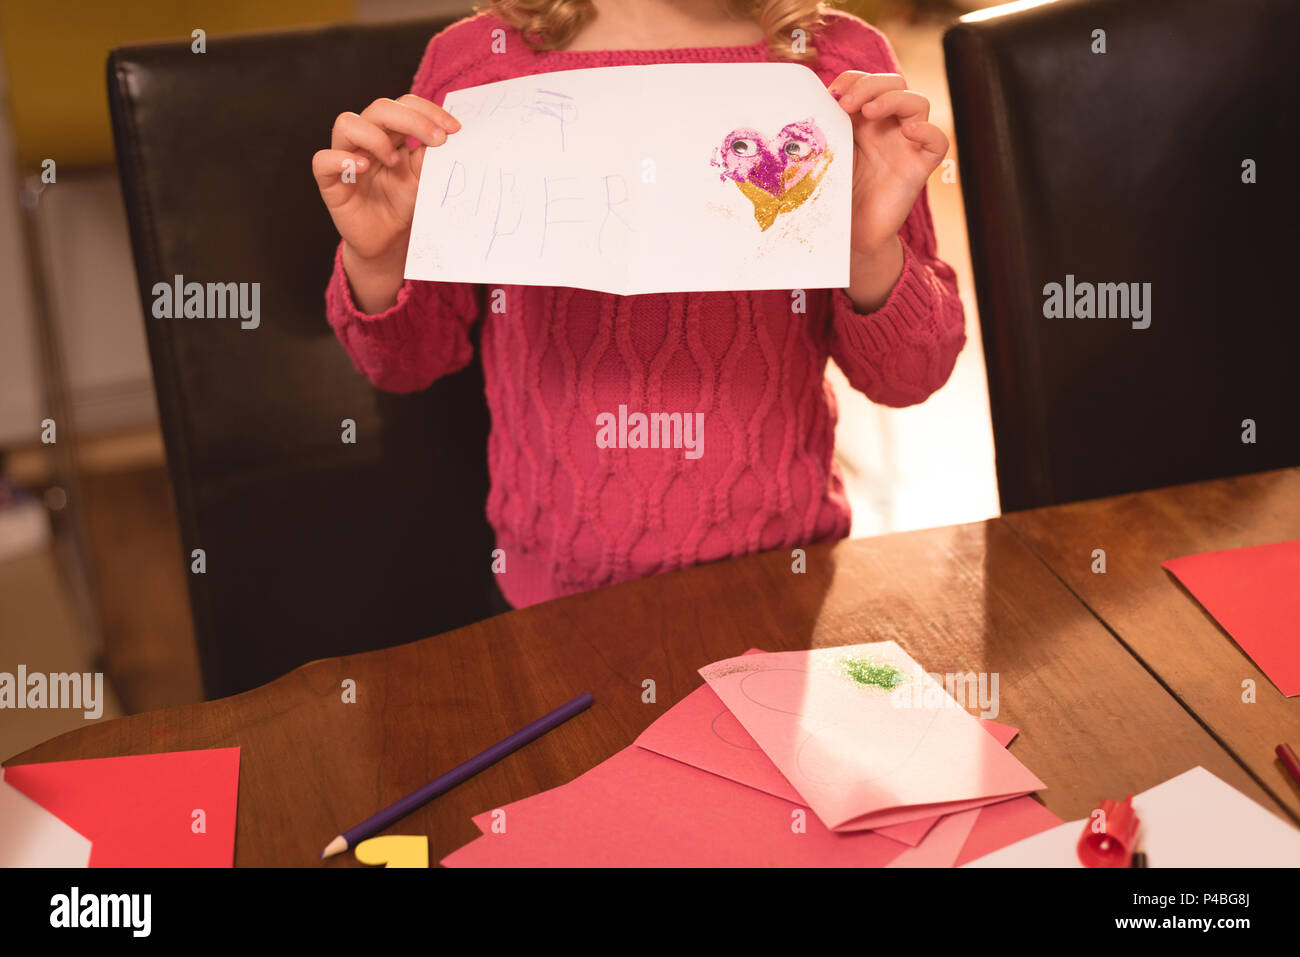 Girl showing valentine card at home Stock Photo